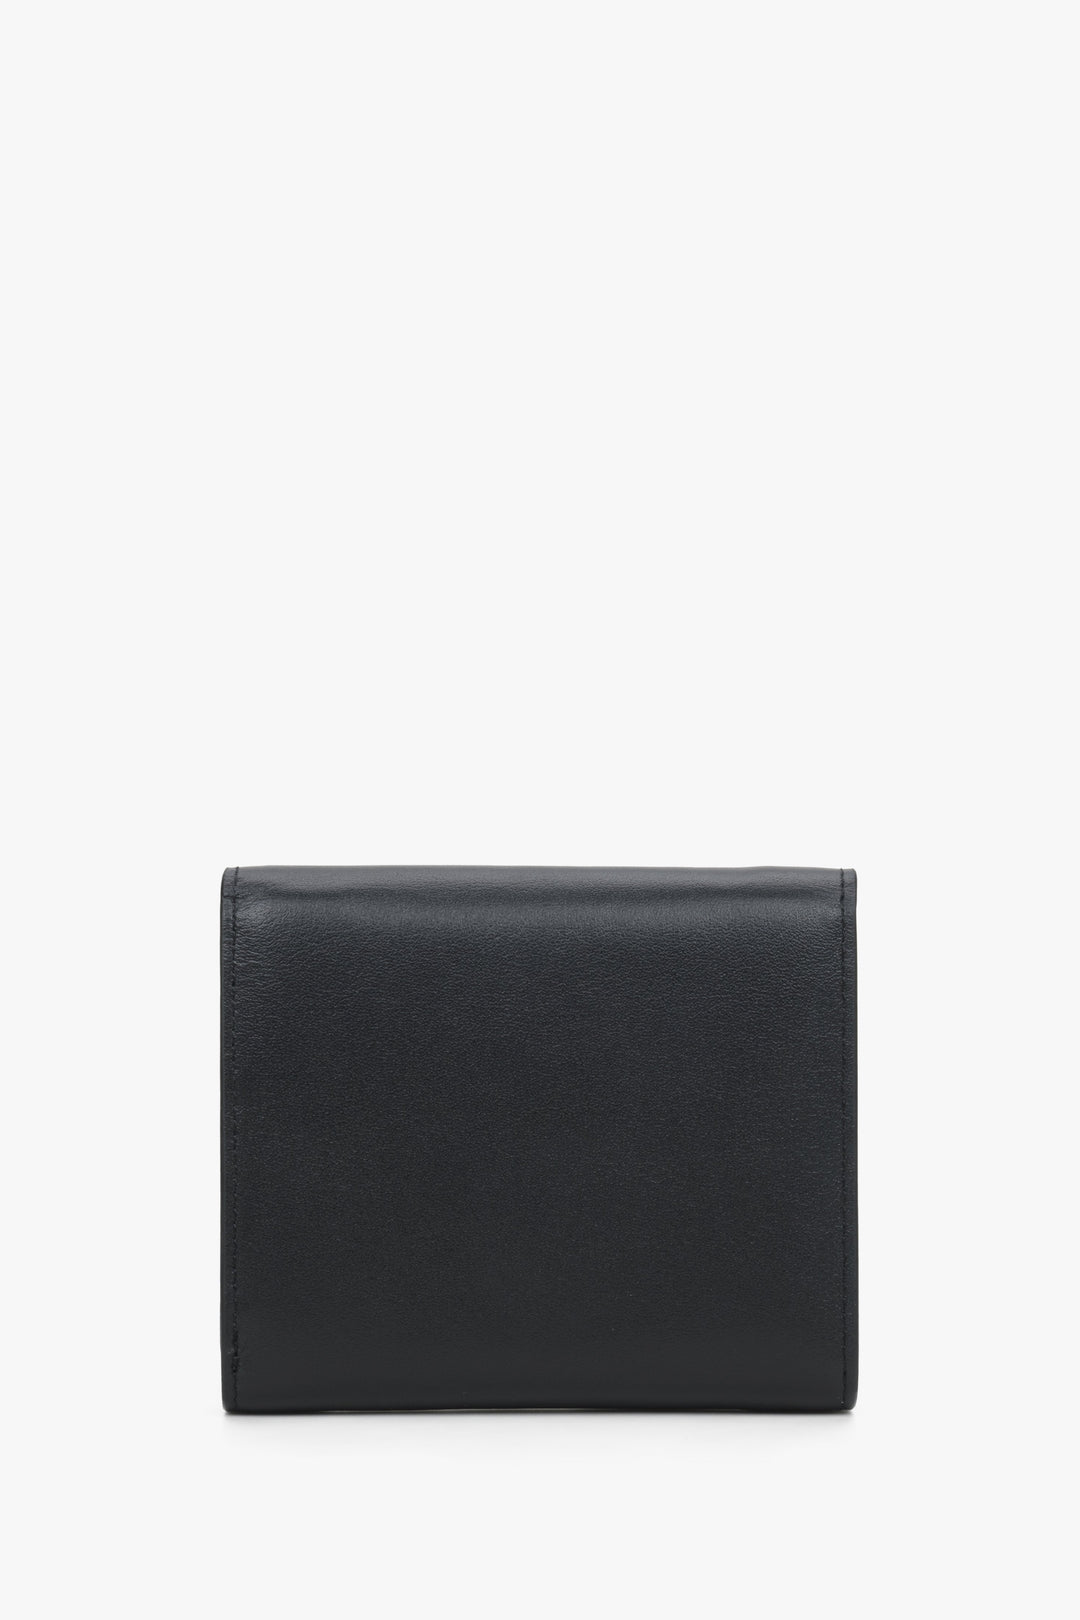 The back of the small black women's wallet by Estro.